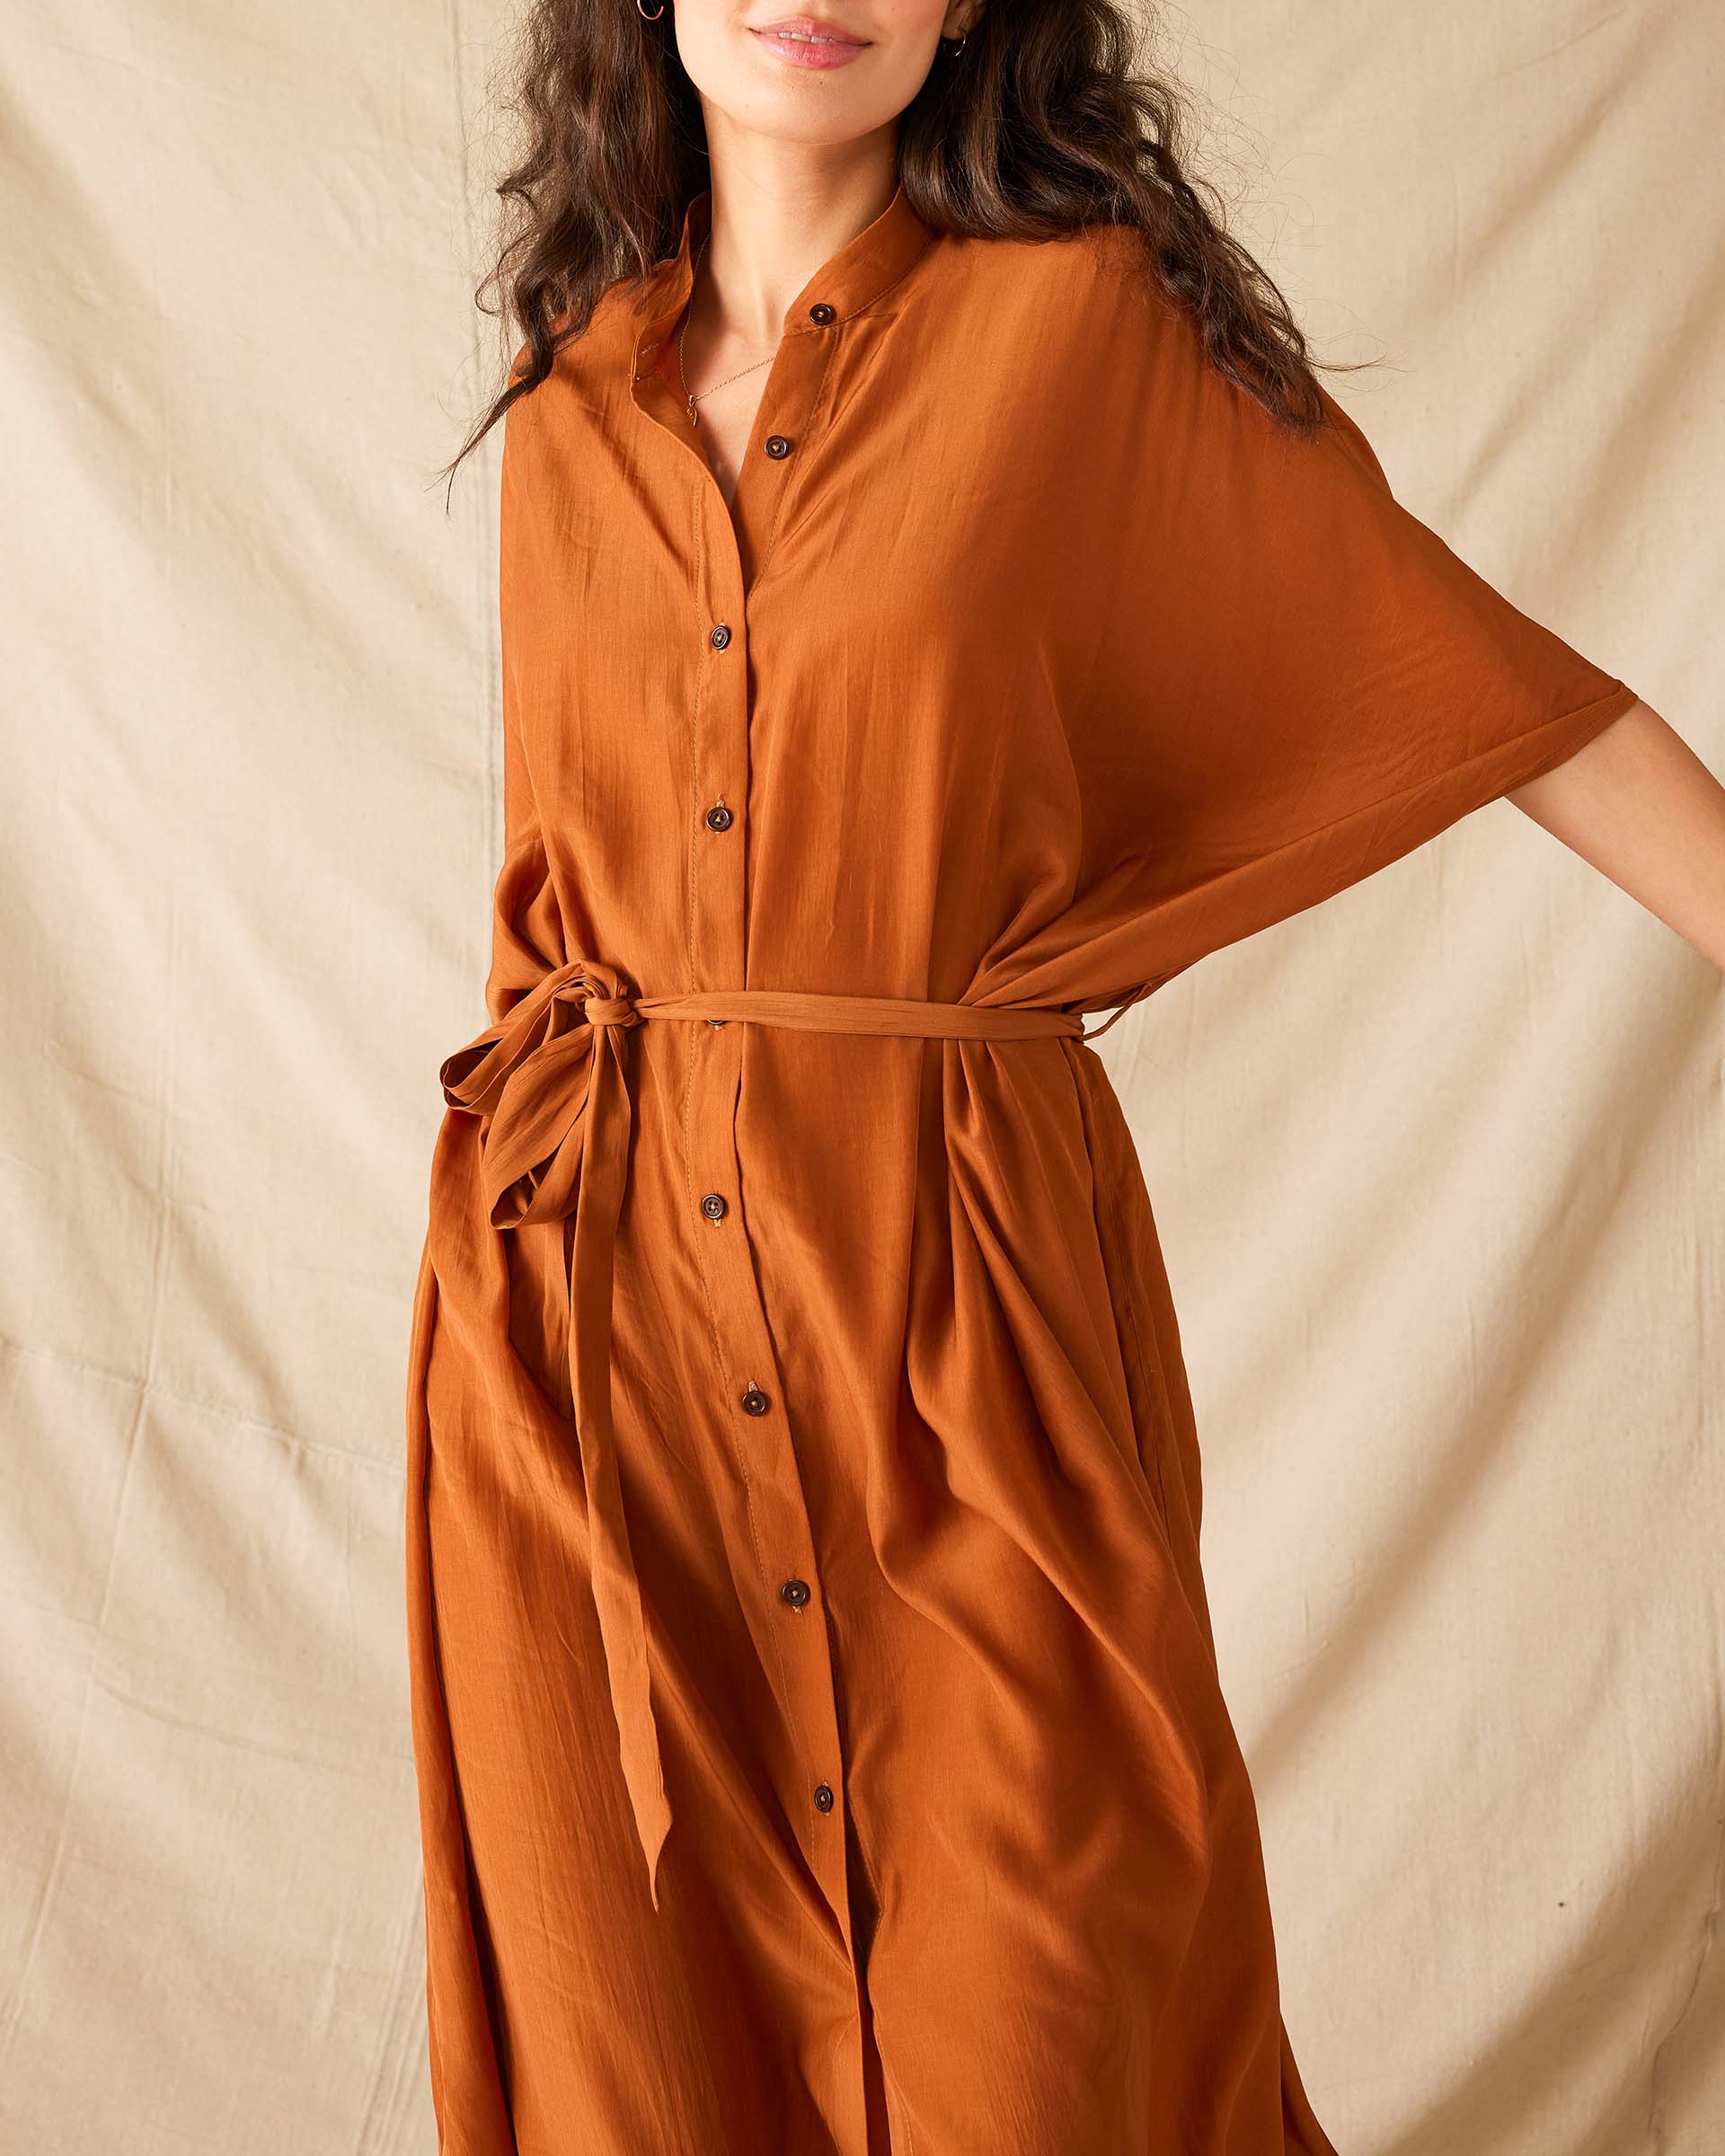 Women's Clay Mallorca Kaftan Dress and Coverup With Button-up Front Sleeveless Drop Shoulder and Removable Self Belt Front View